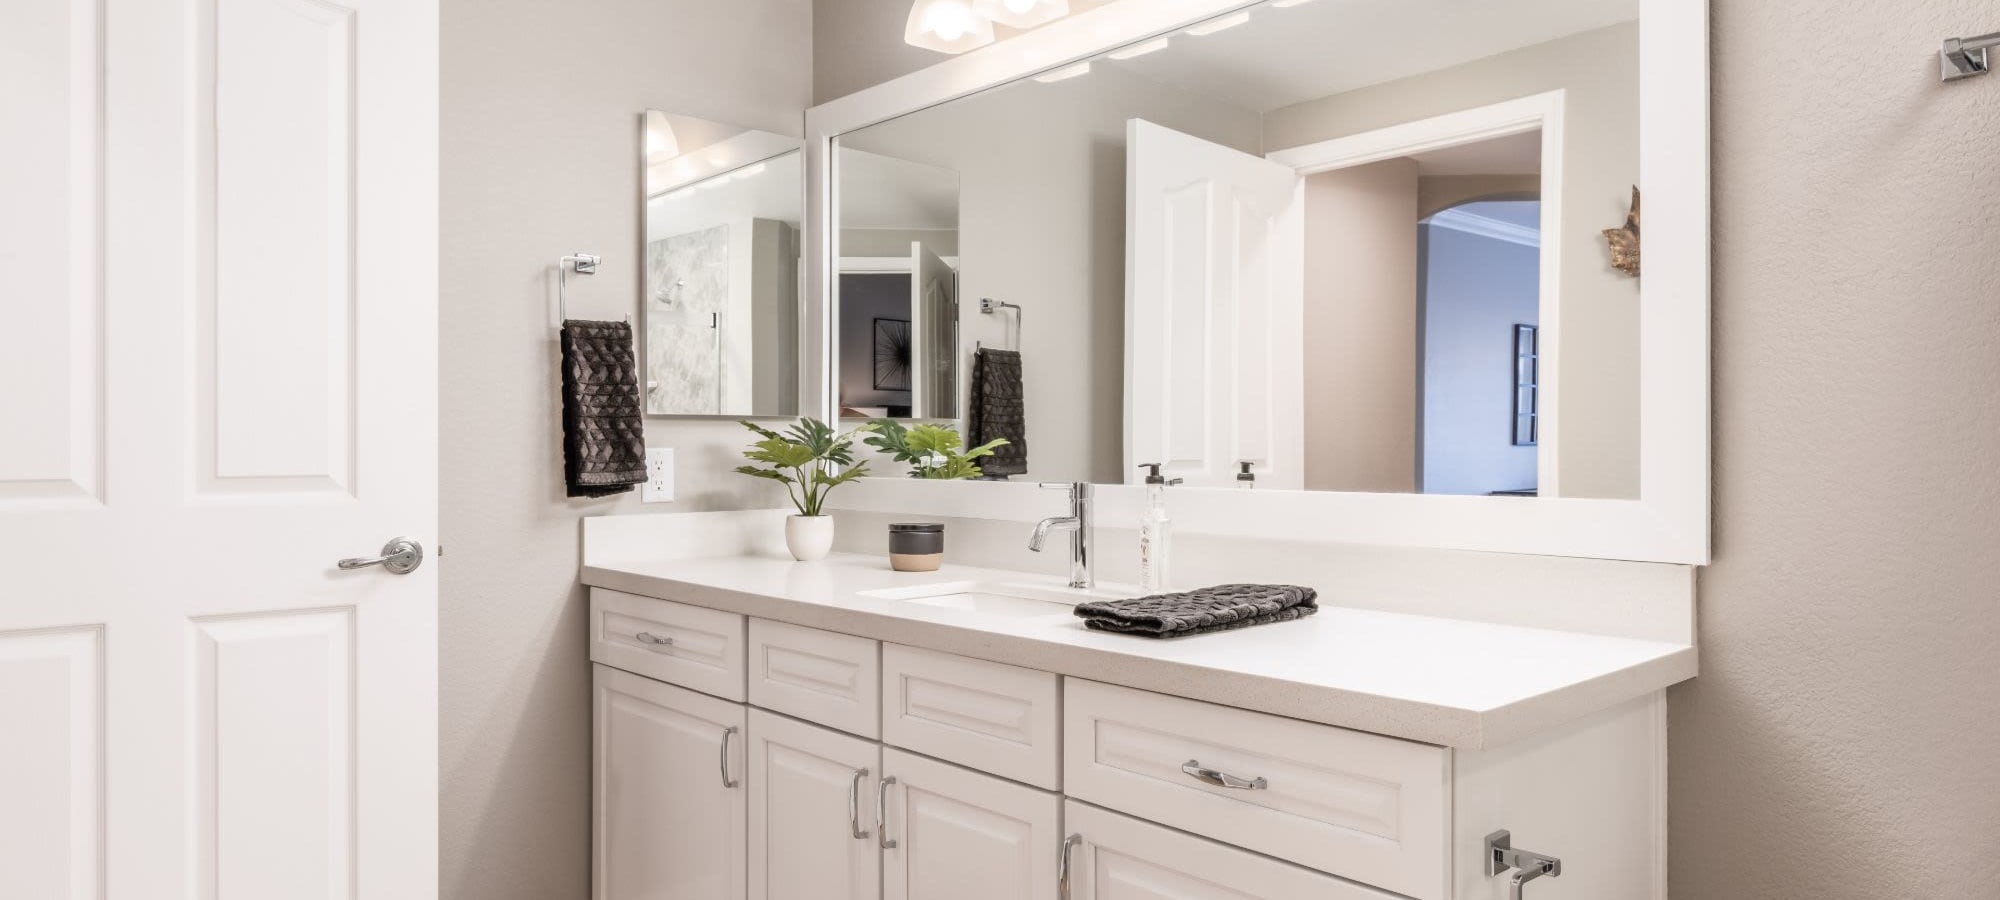 Large vanity with a nice mirror above it in the kitchen at Ascend at Kierland in Scottsdale, Arizona